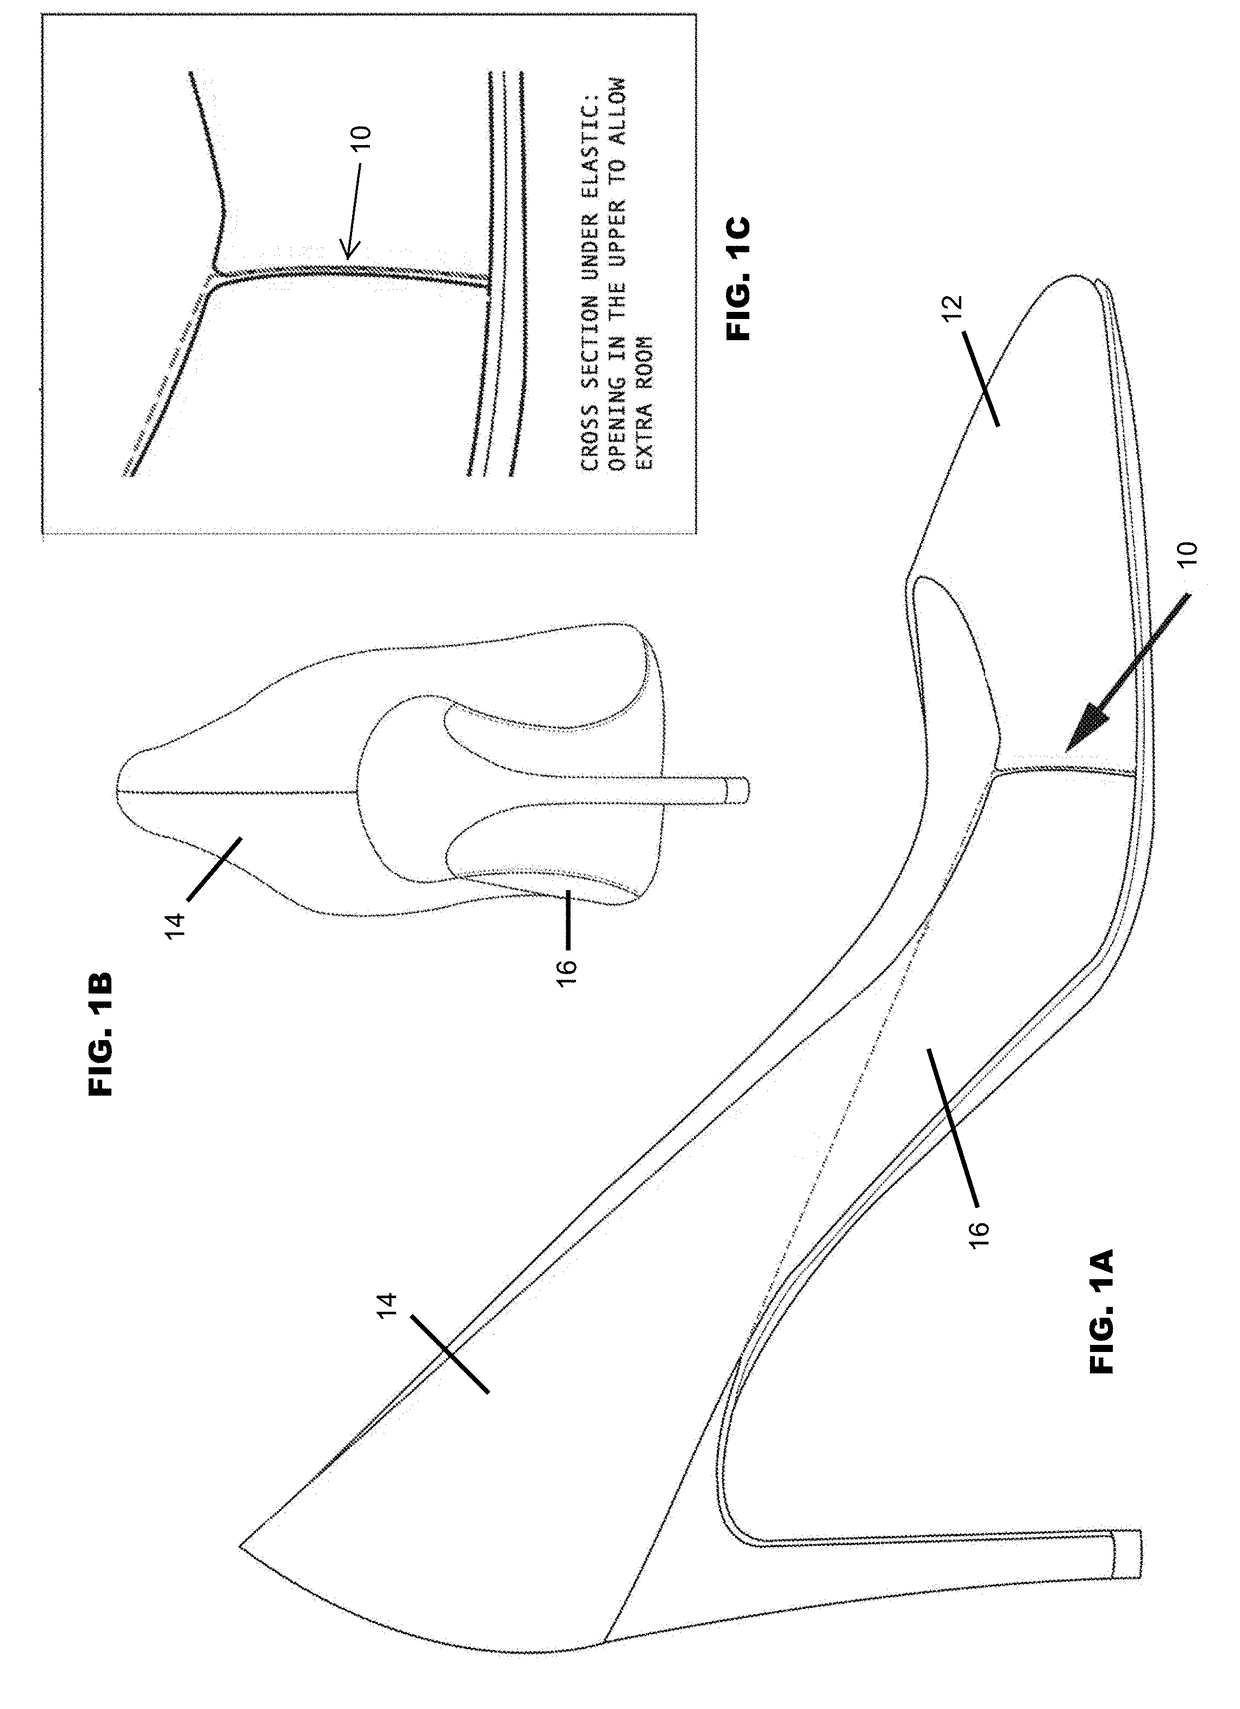 Shoe with flexible upper